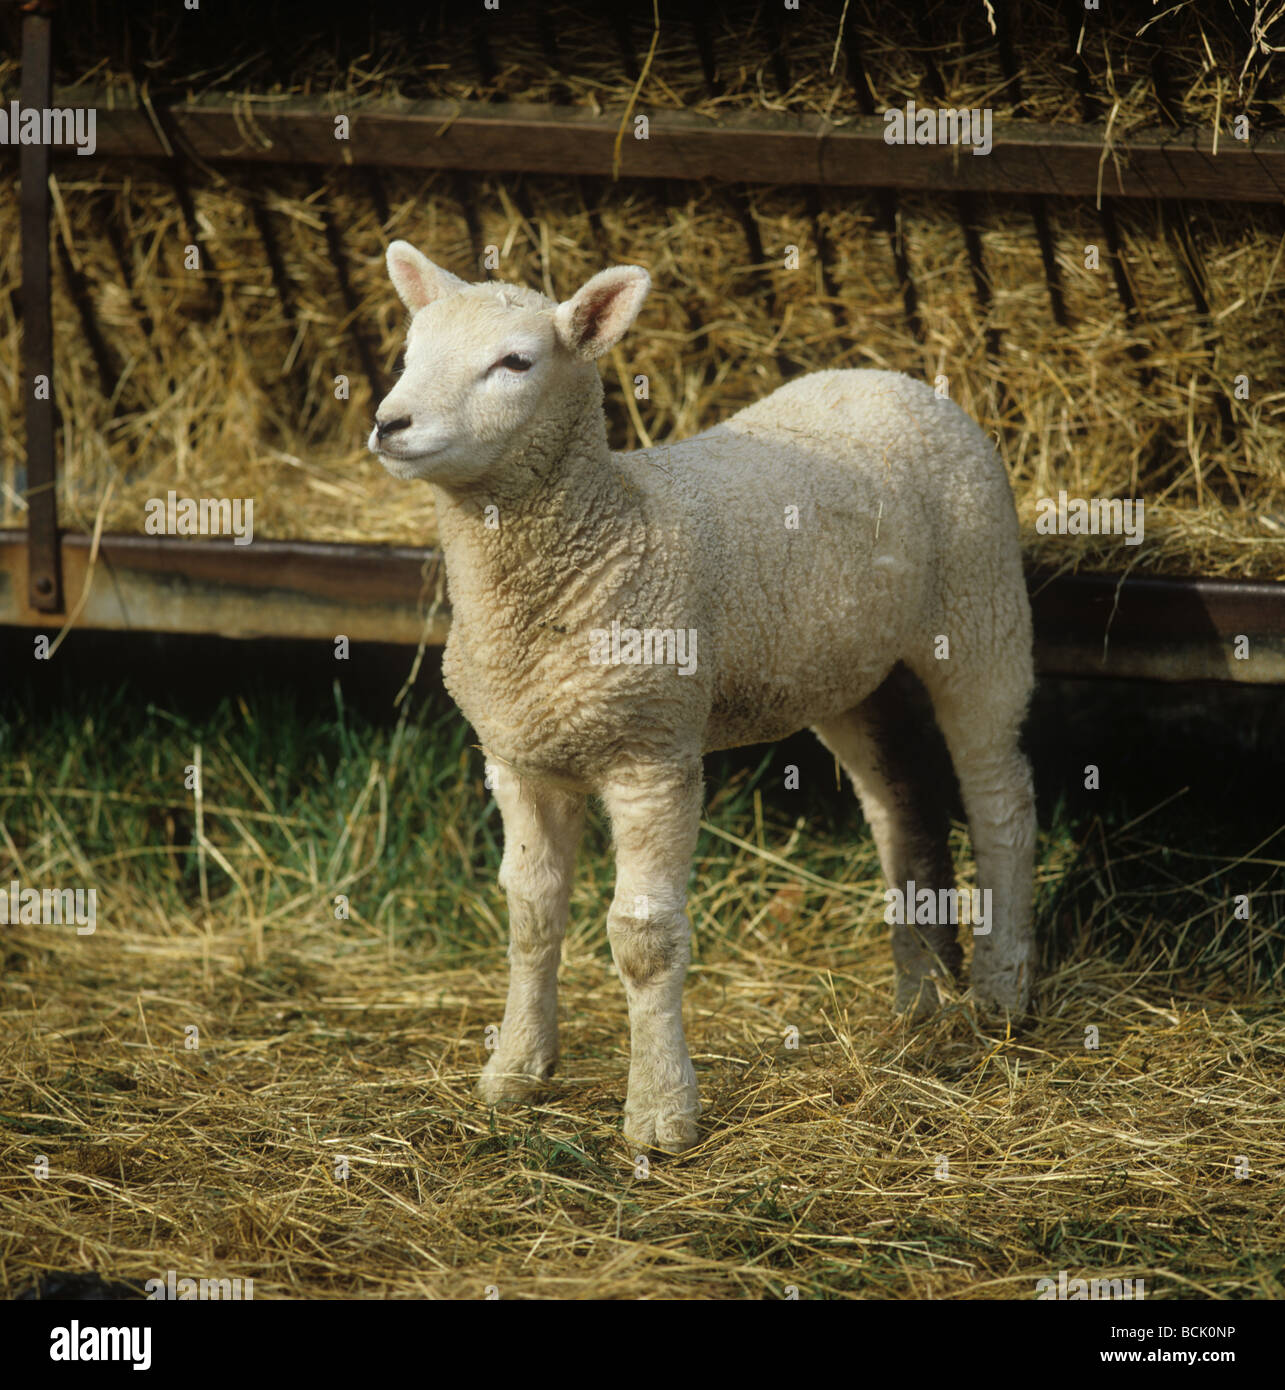 A Charollais X lamb standing by hay feeder Stock Photo